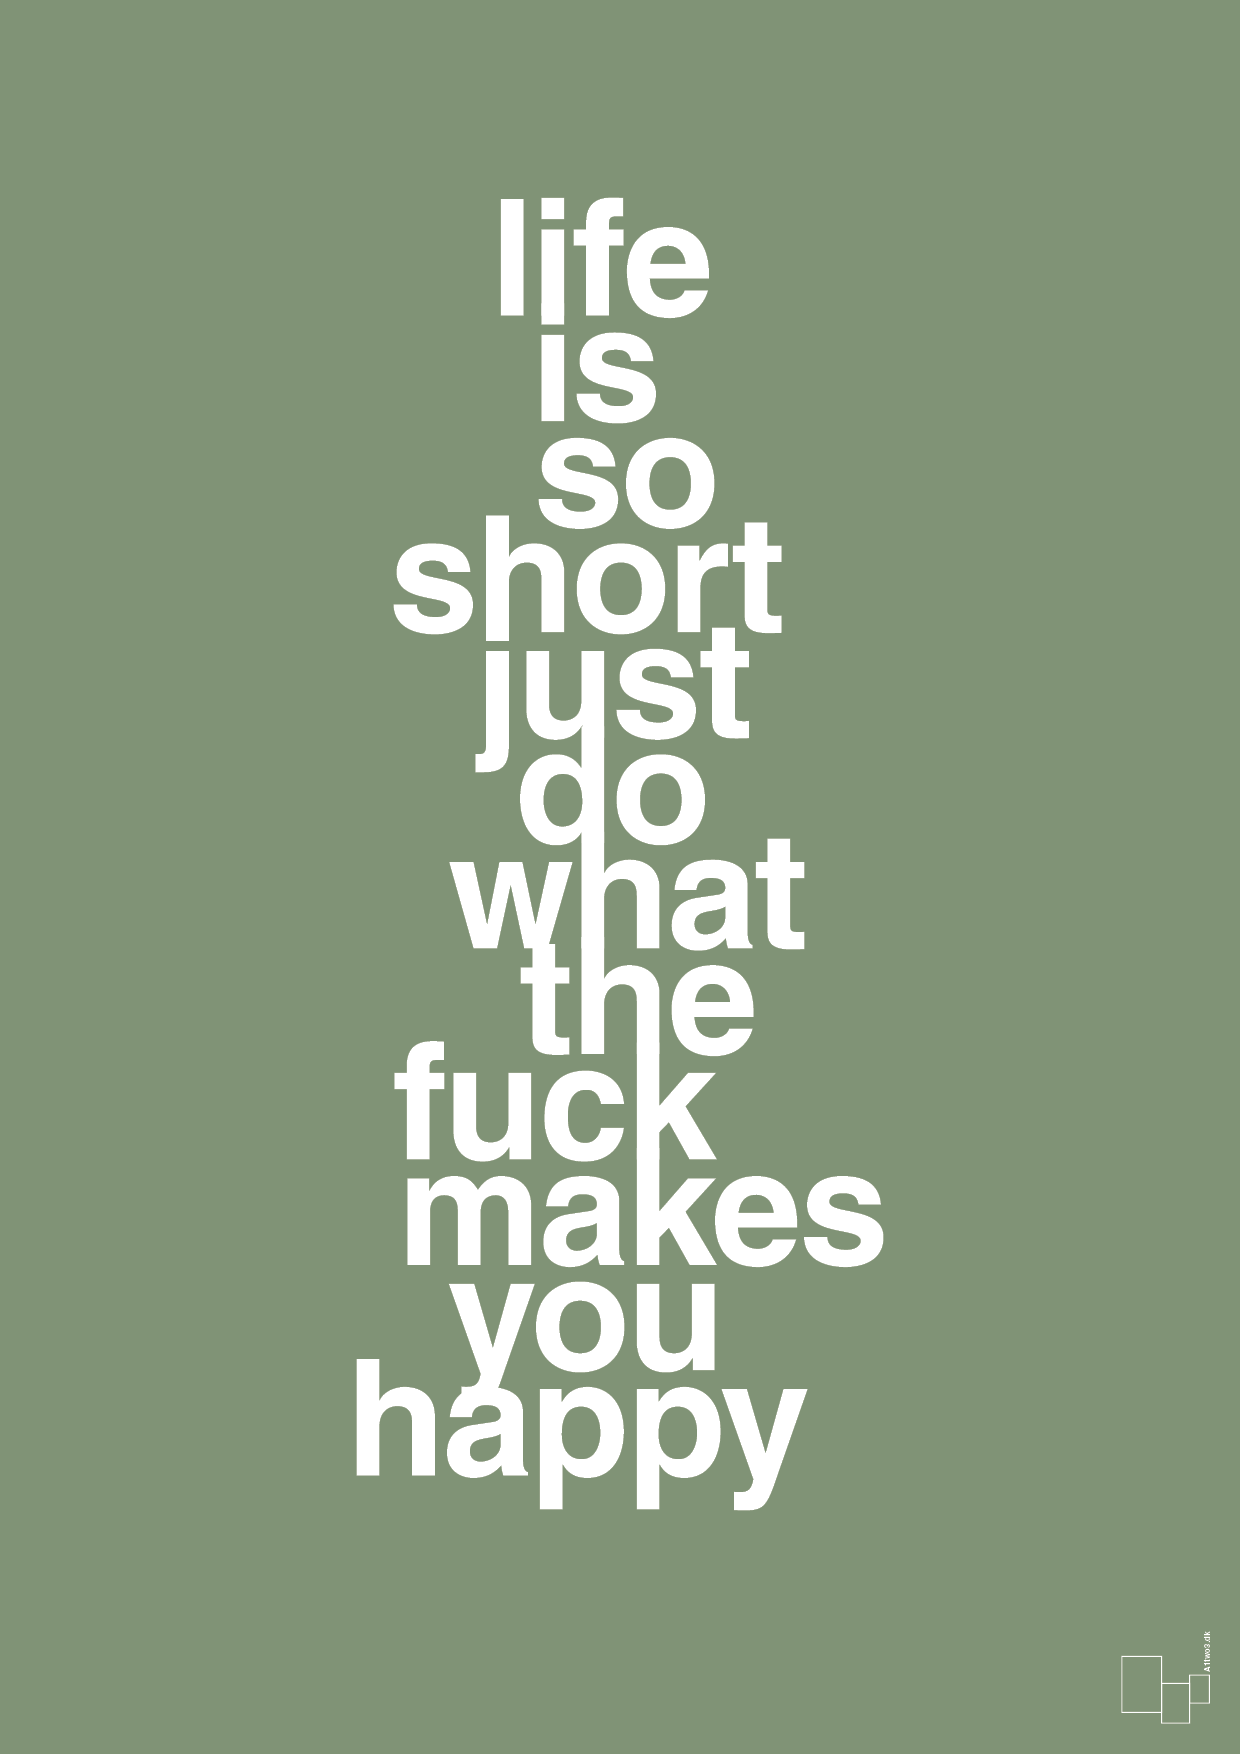 life is so short just do what the fuck makes you happy - Plakat med Ordsprog i Jade